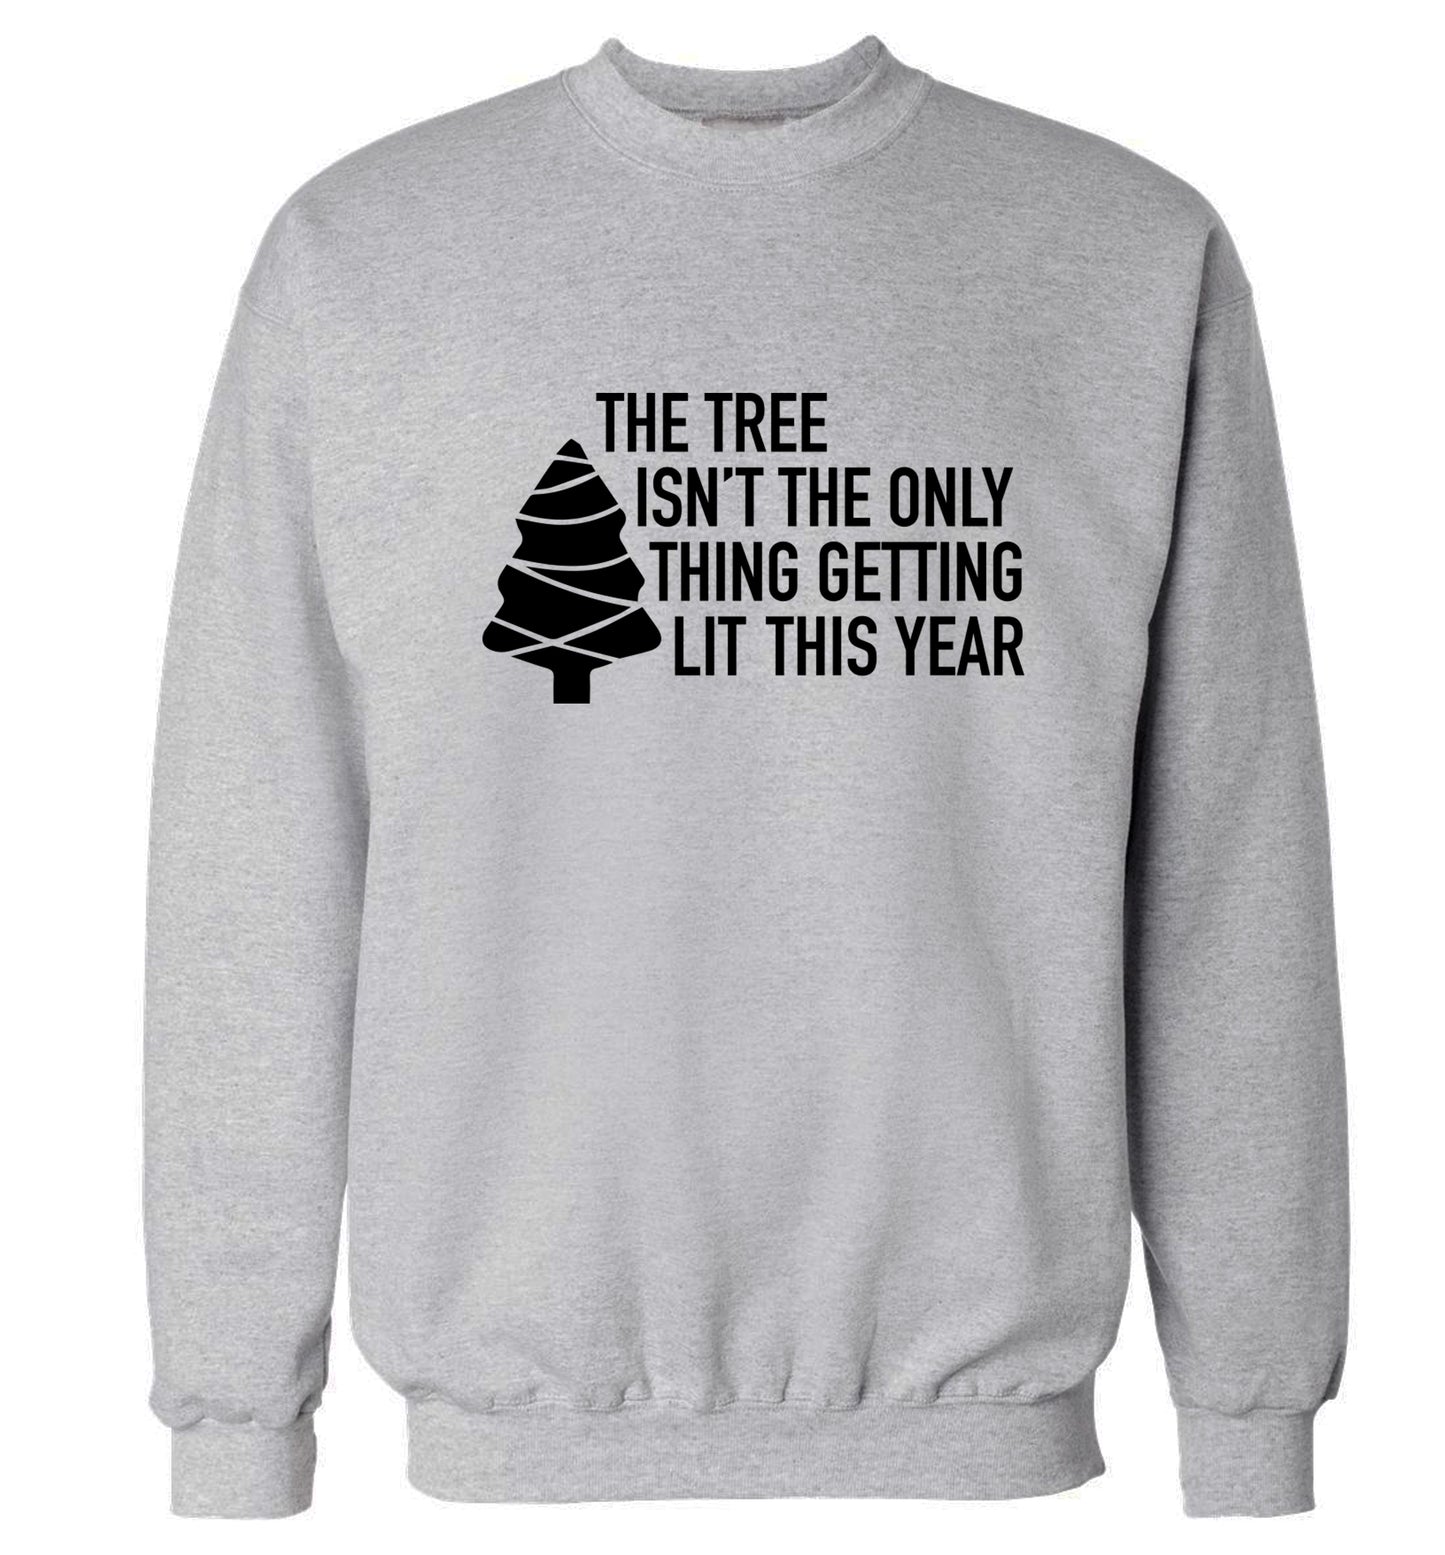 The tree isn't the only thing getting lit this year Adult's unisex grey Sweater 2XL